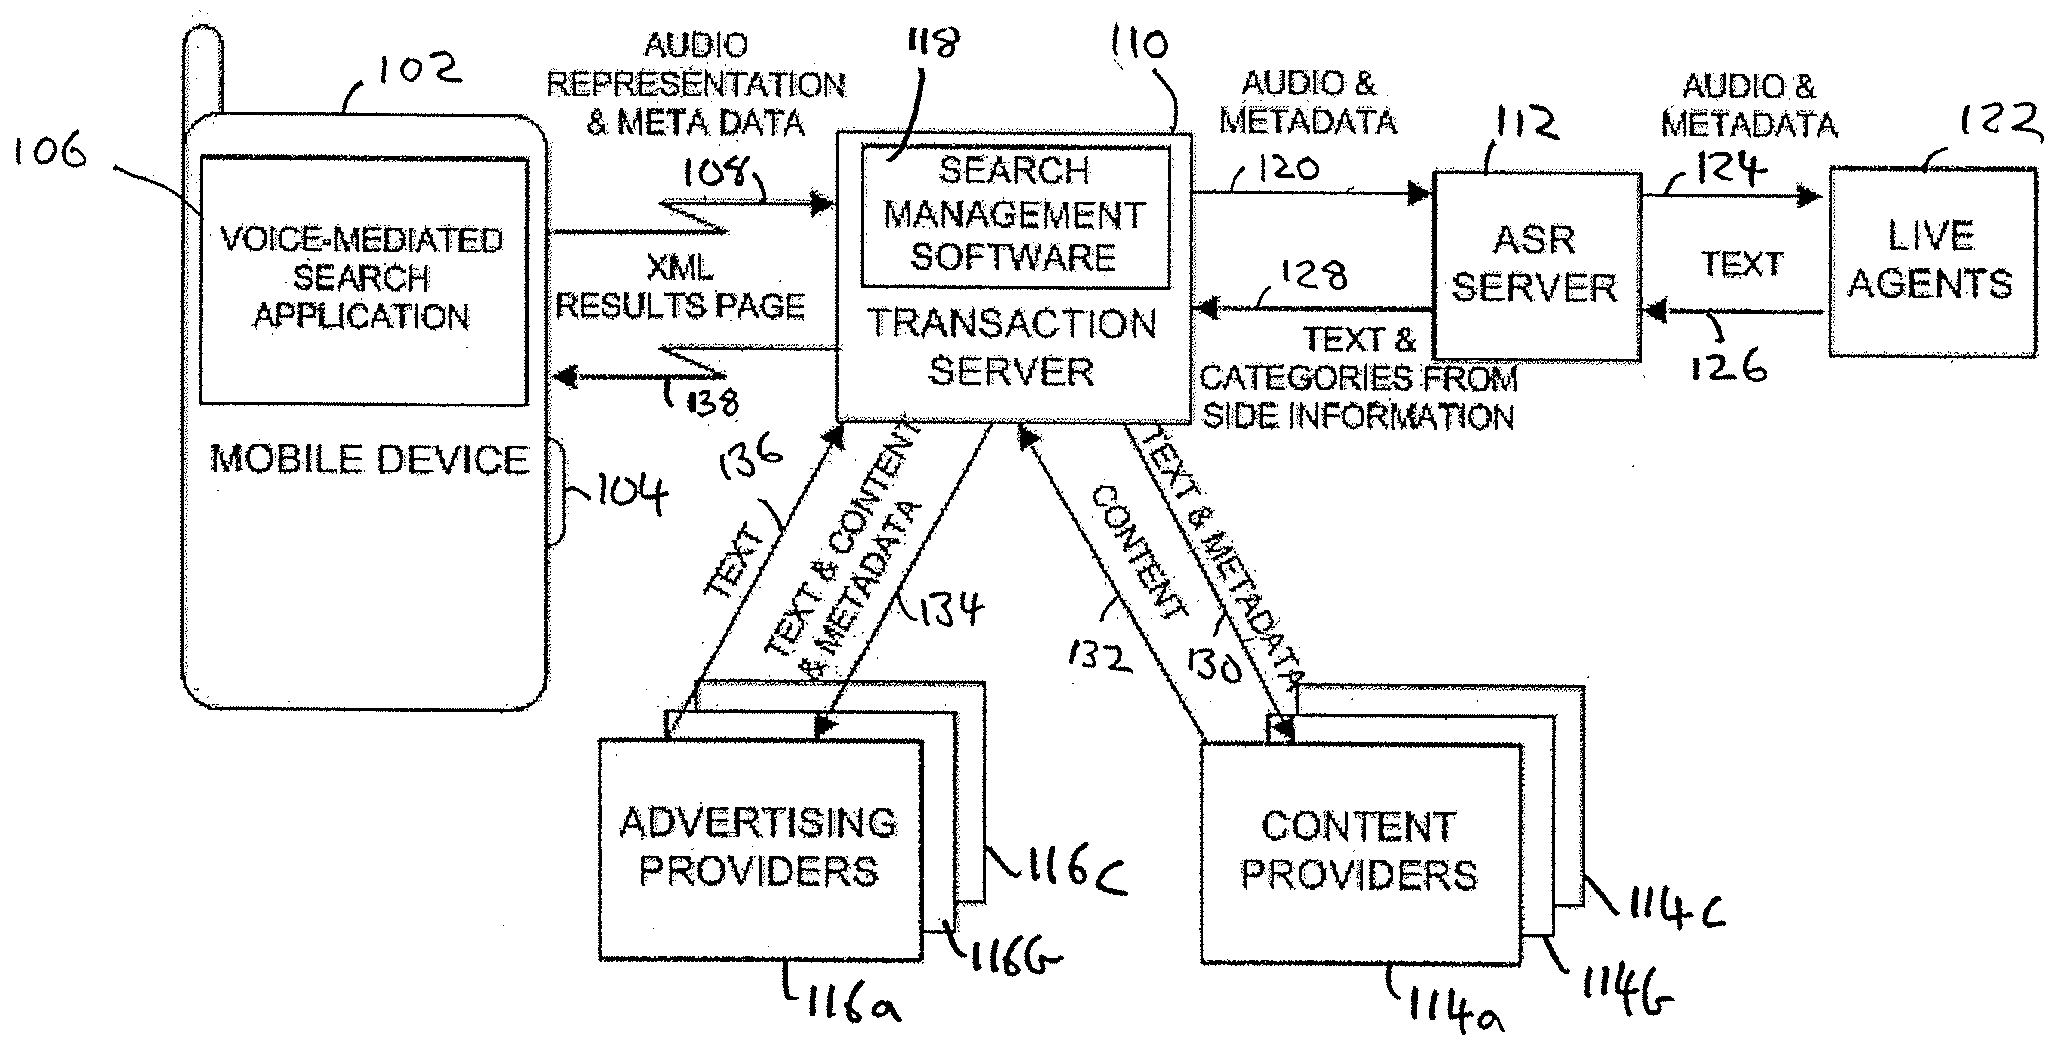 Local storage and use of search results for voice-enabled mobile communications devices